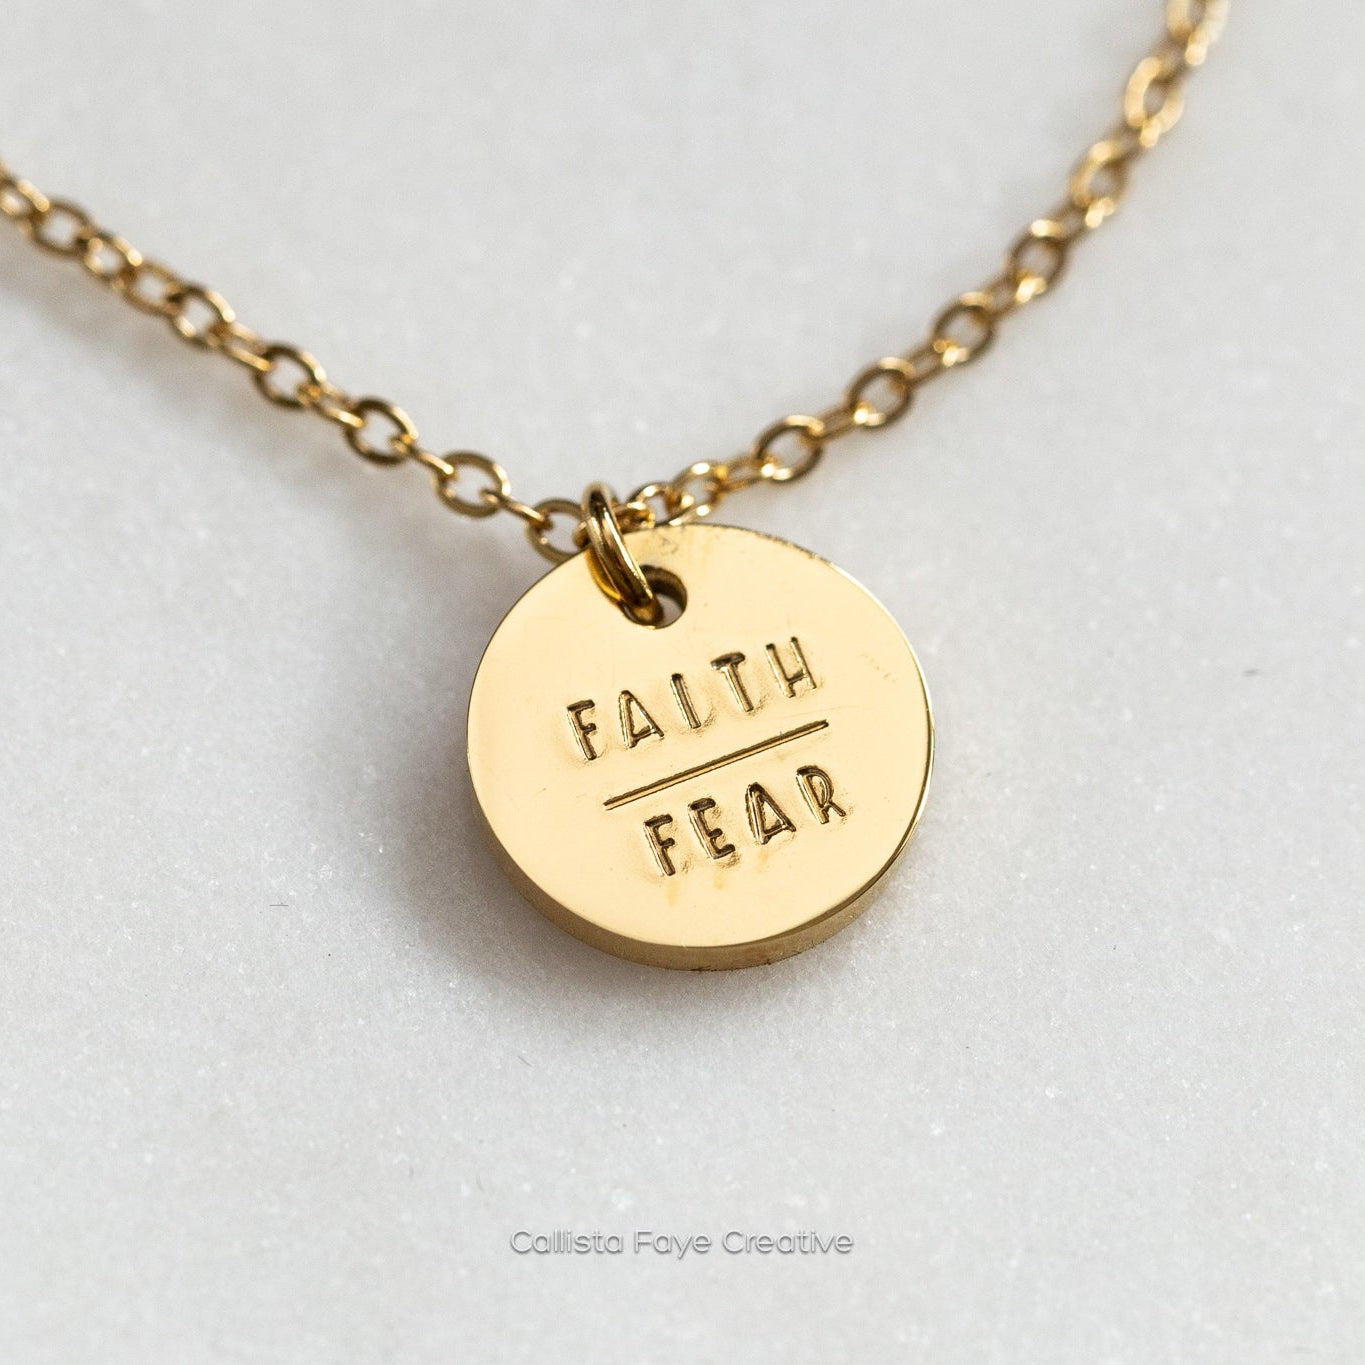 Faith | Fear, Hand Stamped Coin Necklace Necklaces callistafaye   